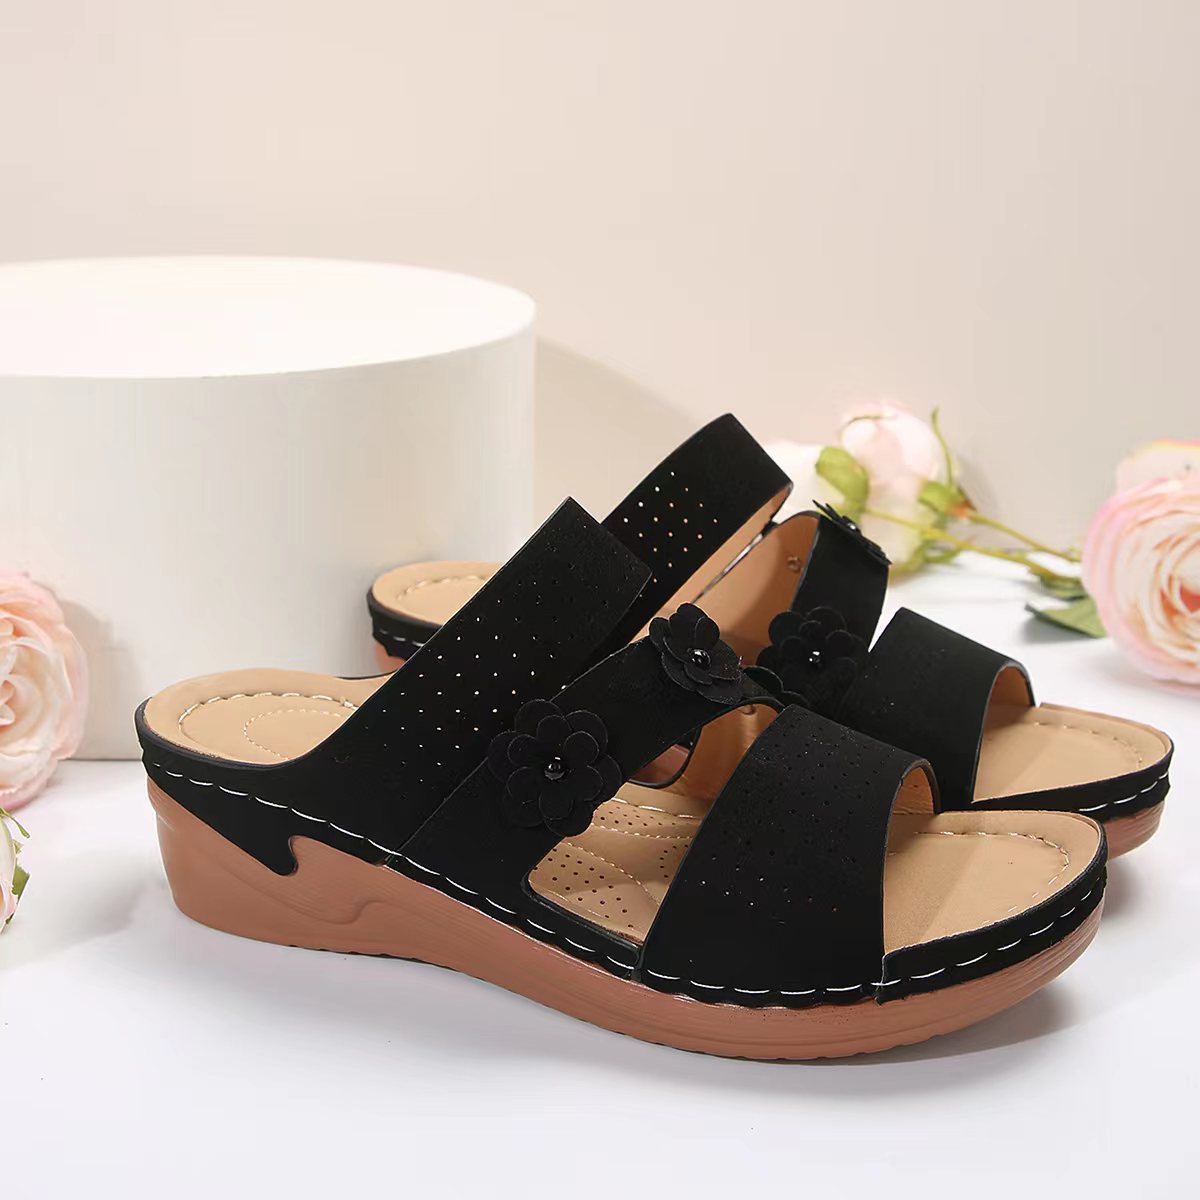 Flower Leather Wedge Sandals